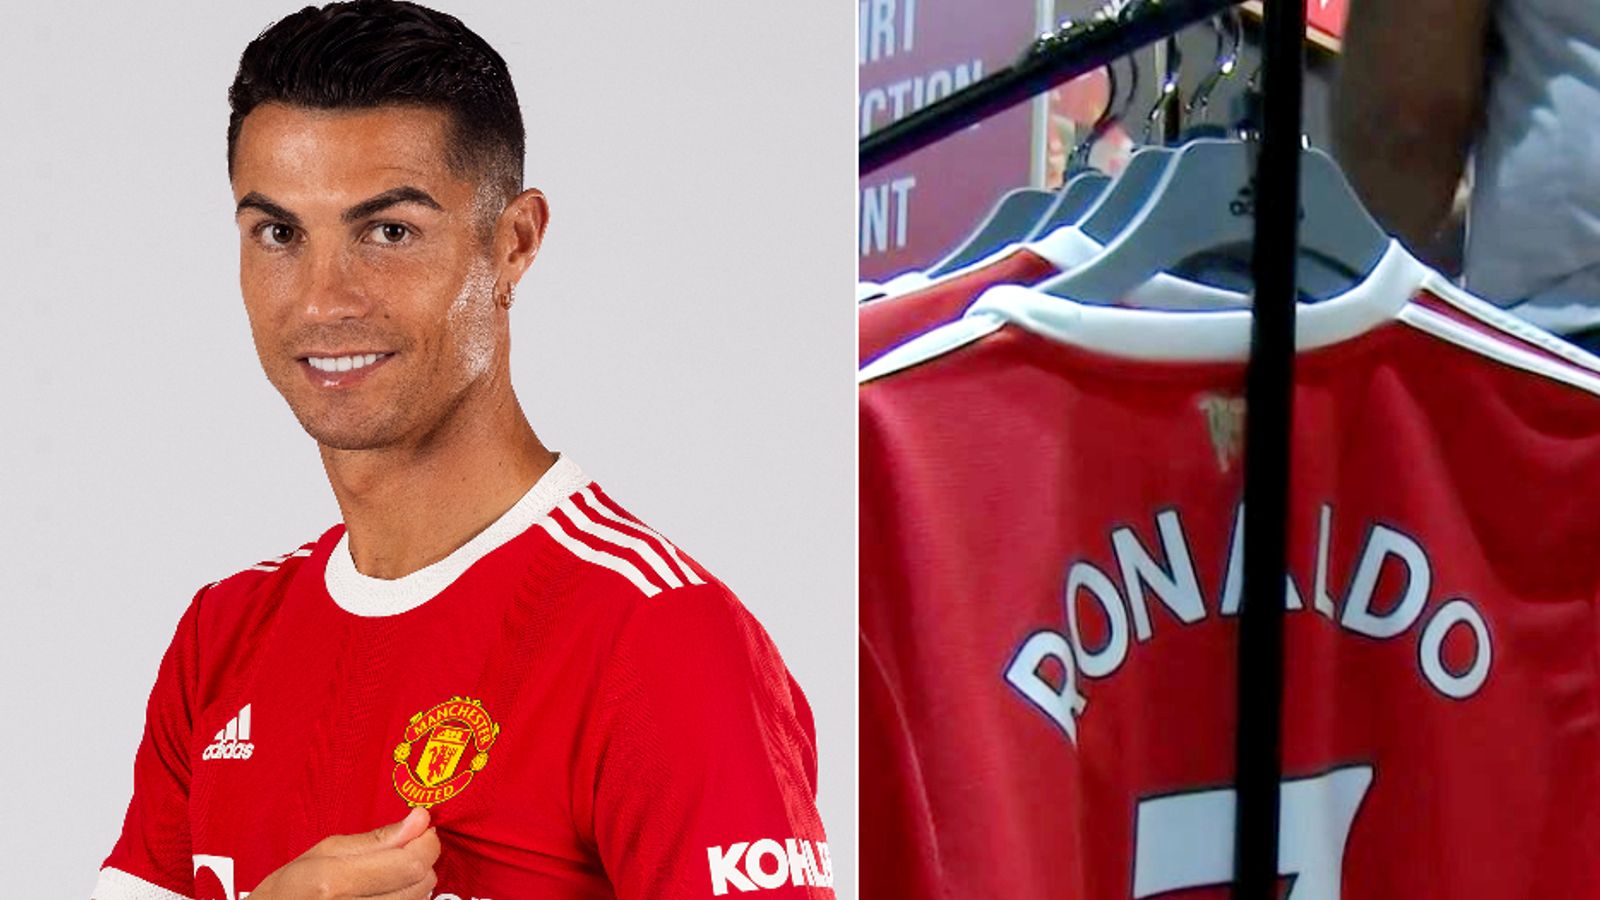 manchester united shirt release date